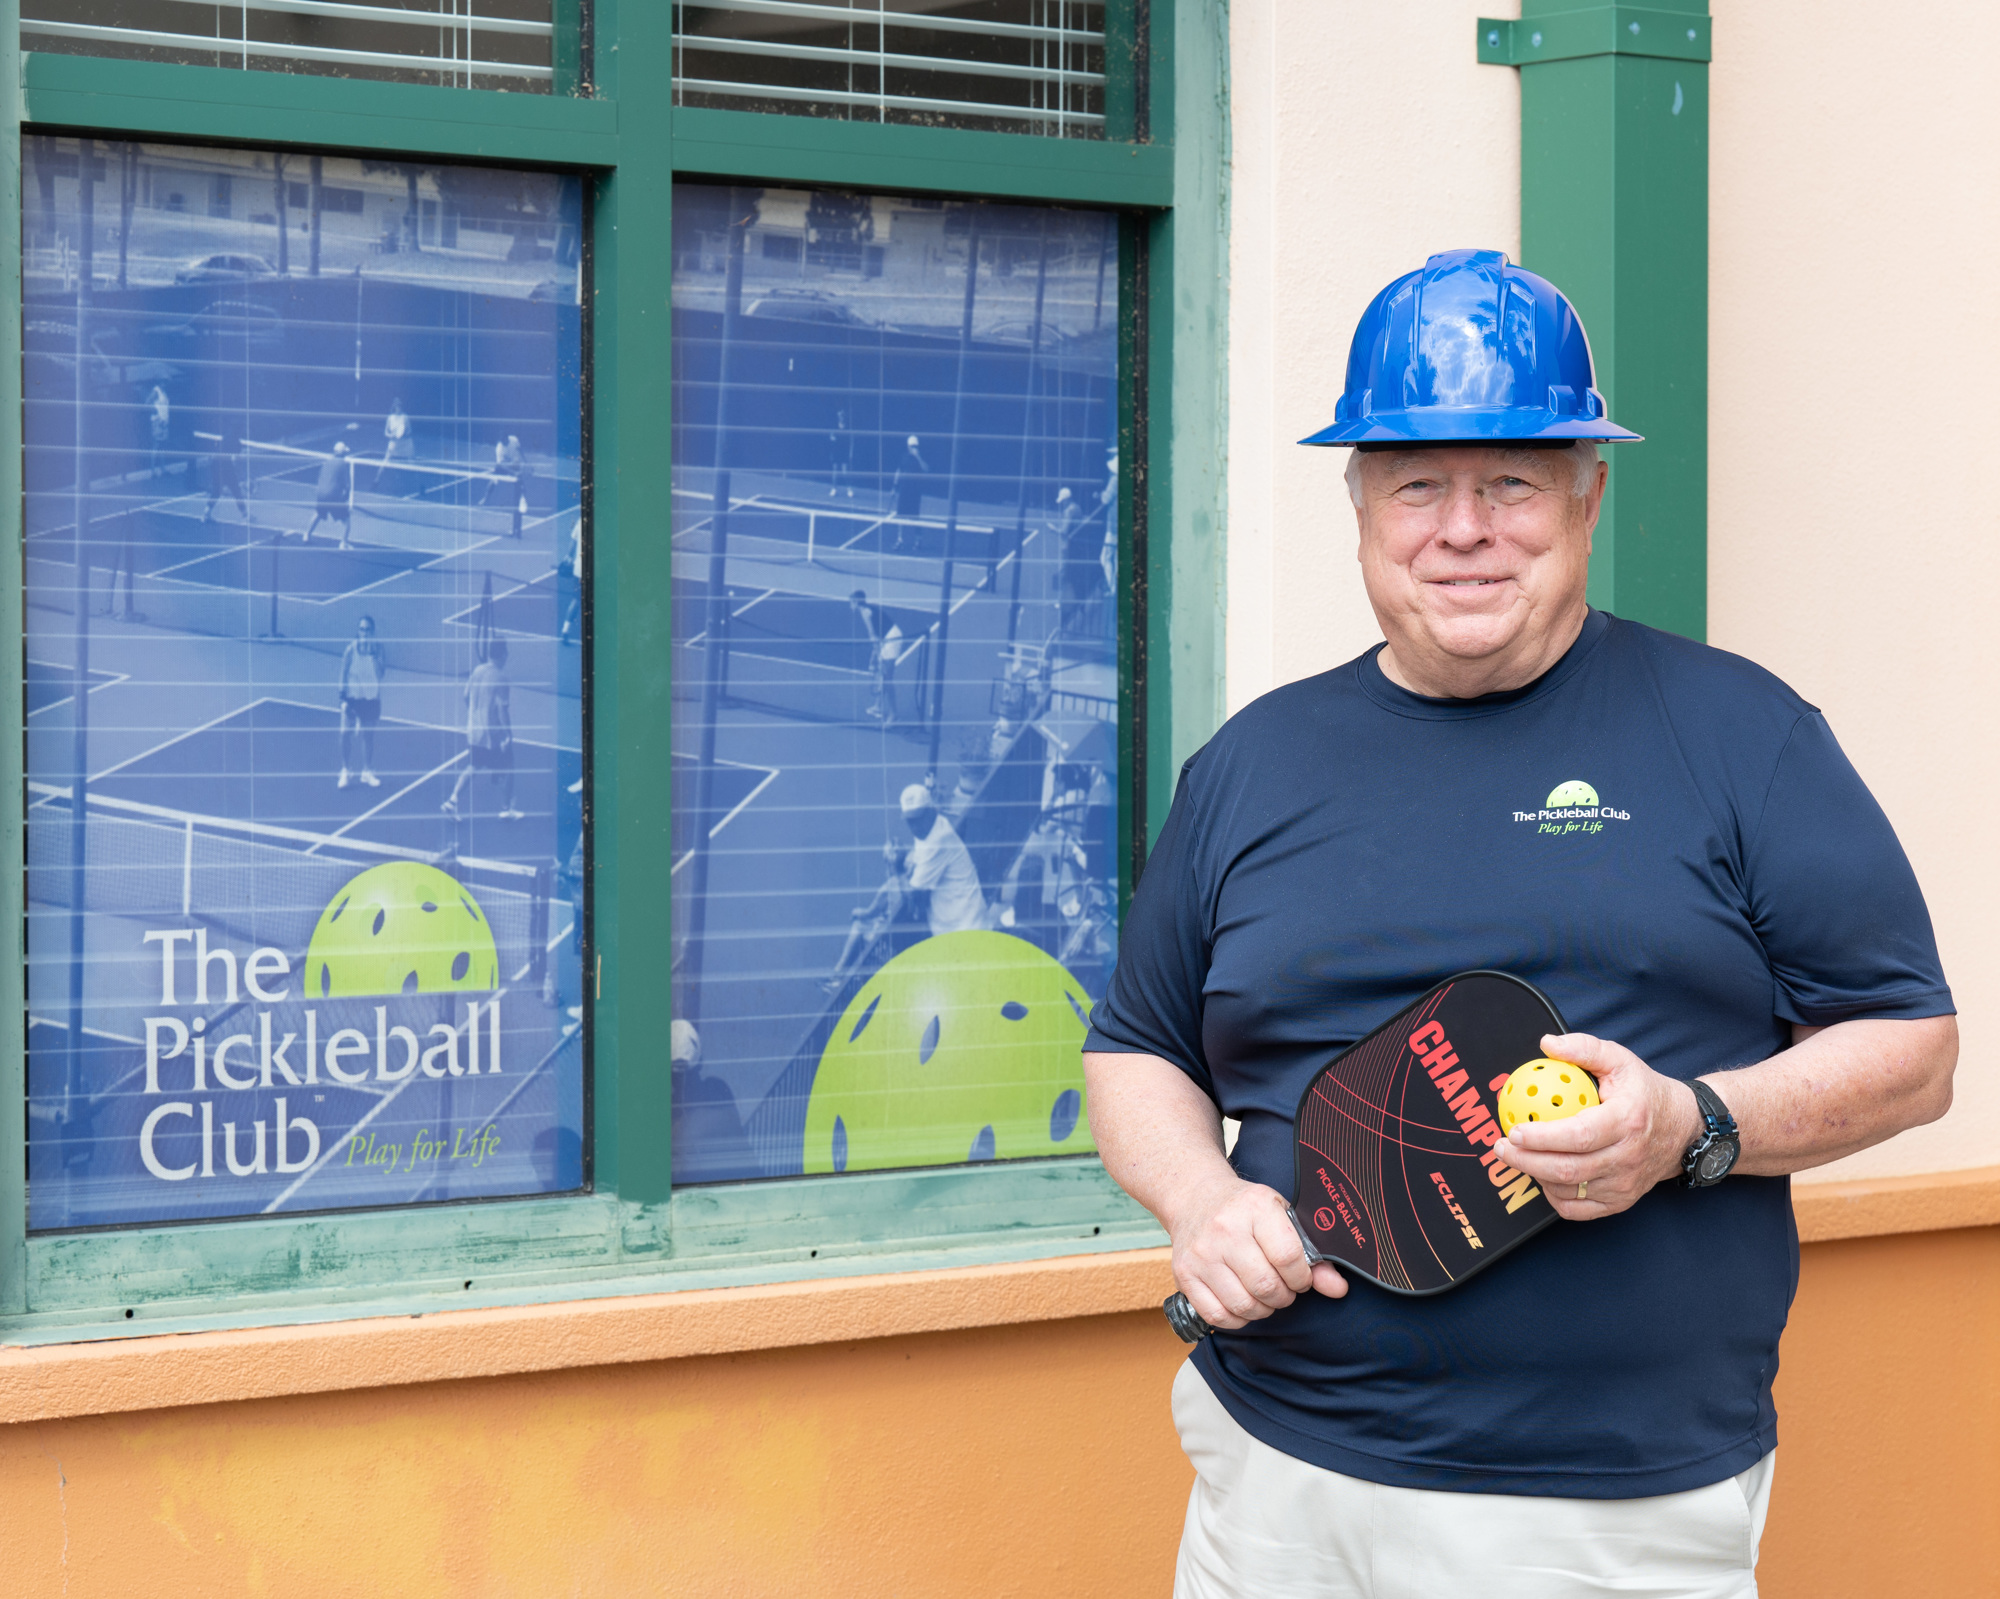 Brian McCarthy on the construction site of the first Pickleball Club location in Sarasota. (Photo by Lori Sax)